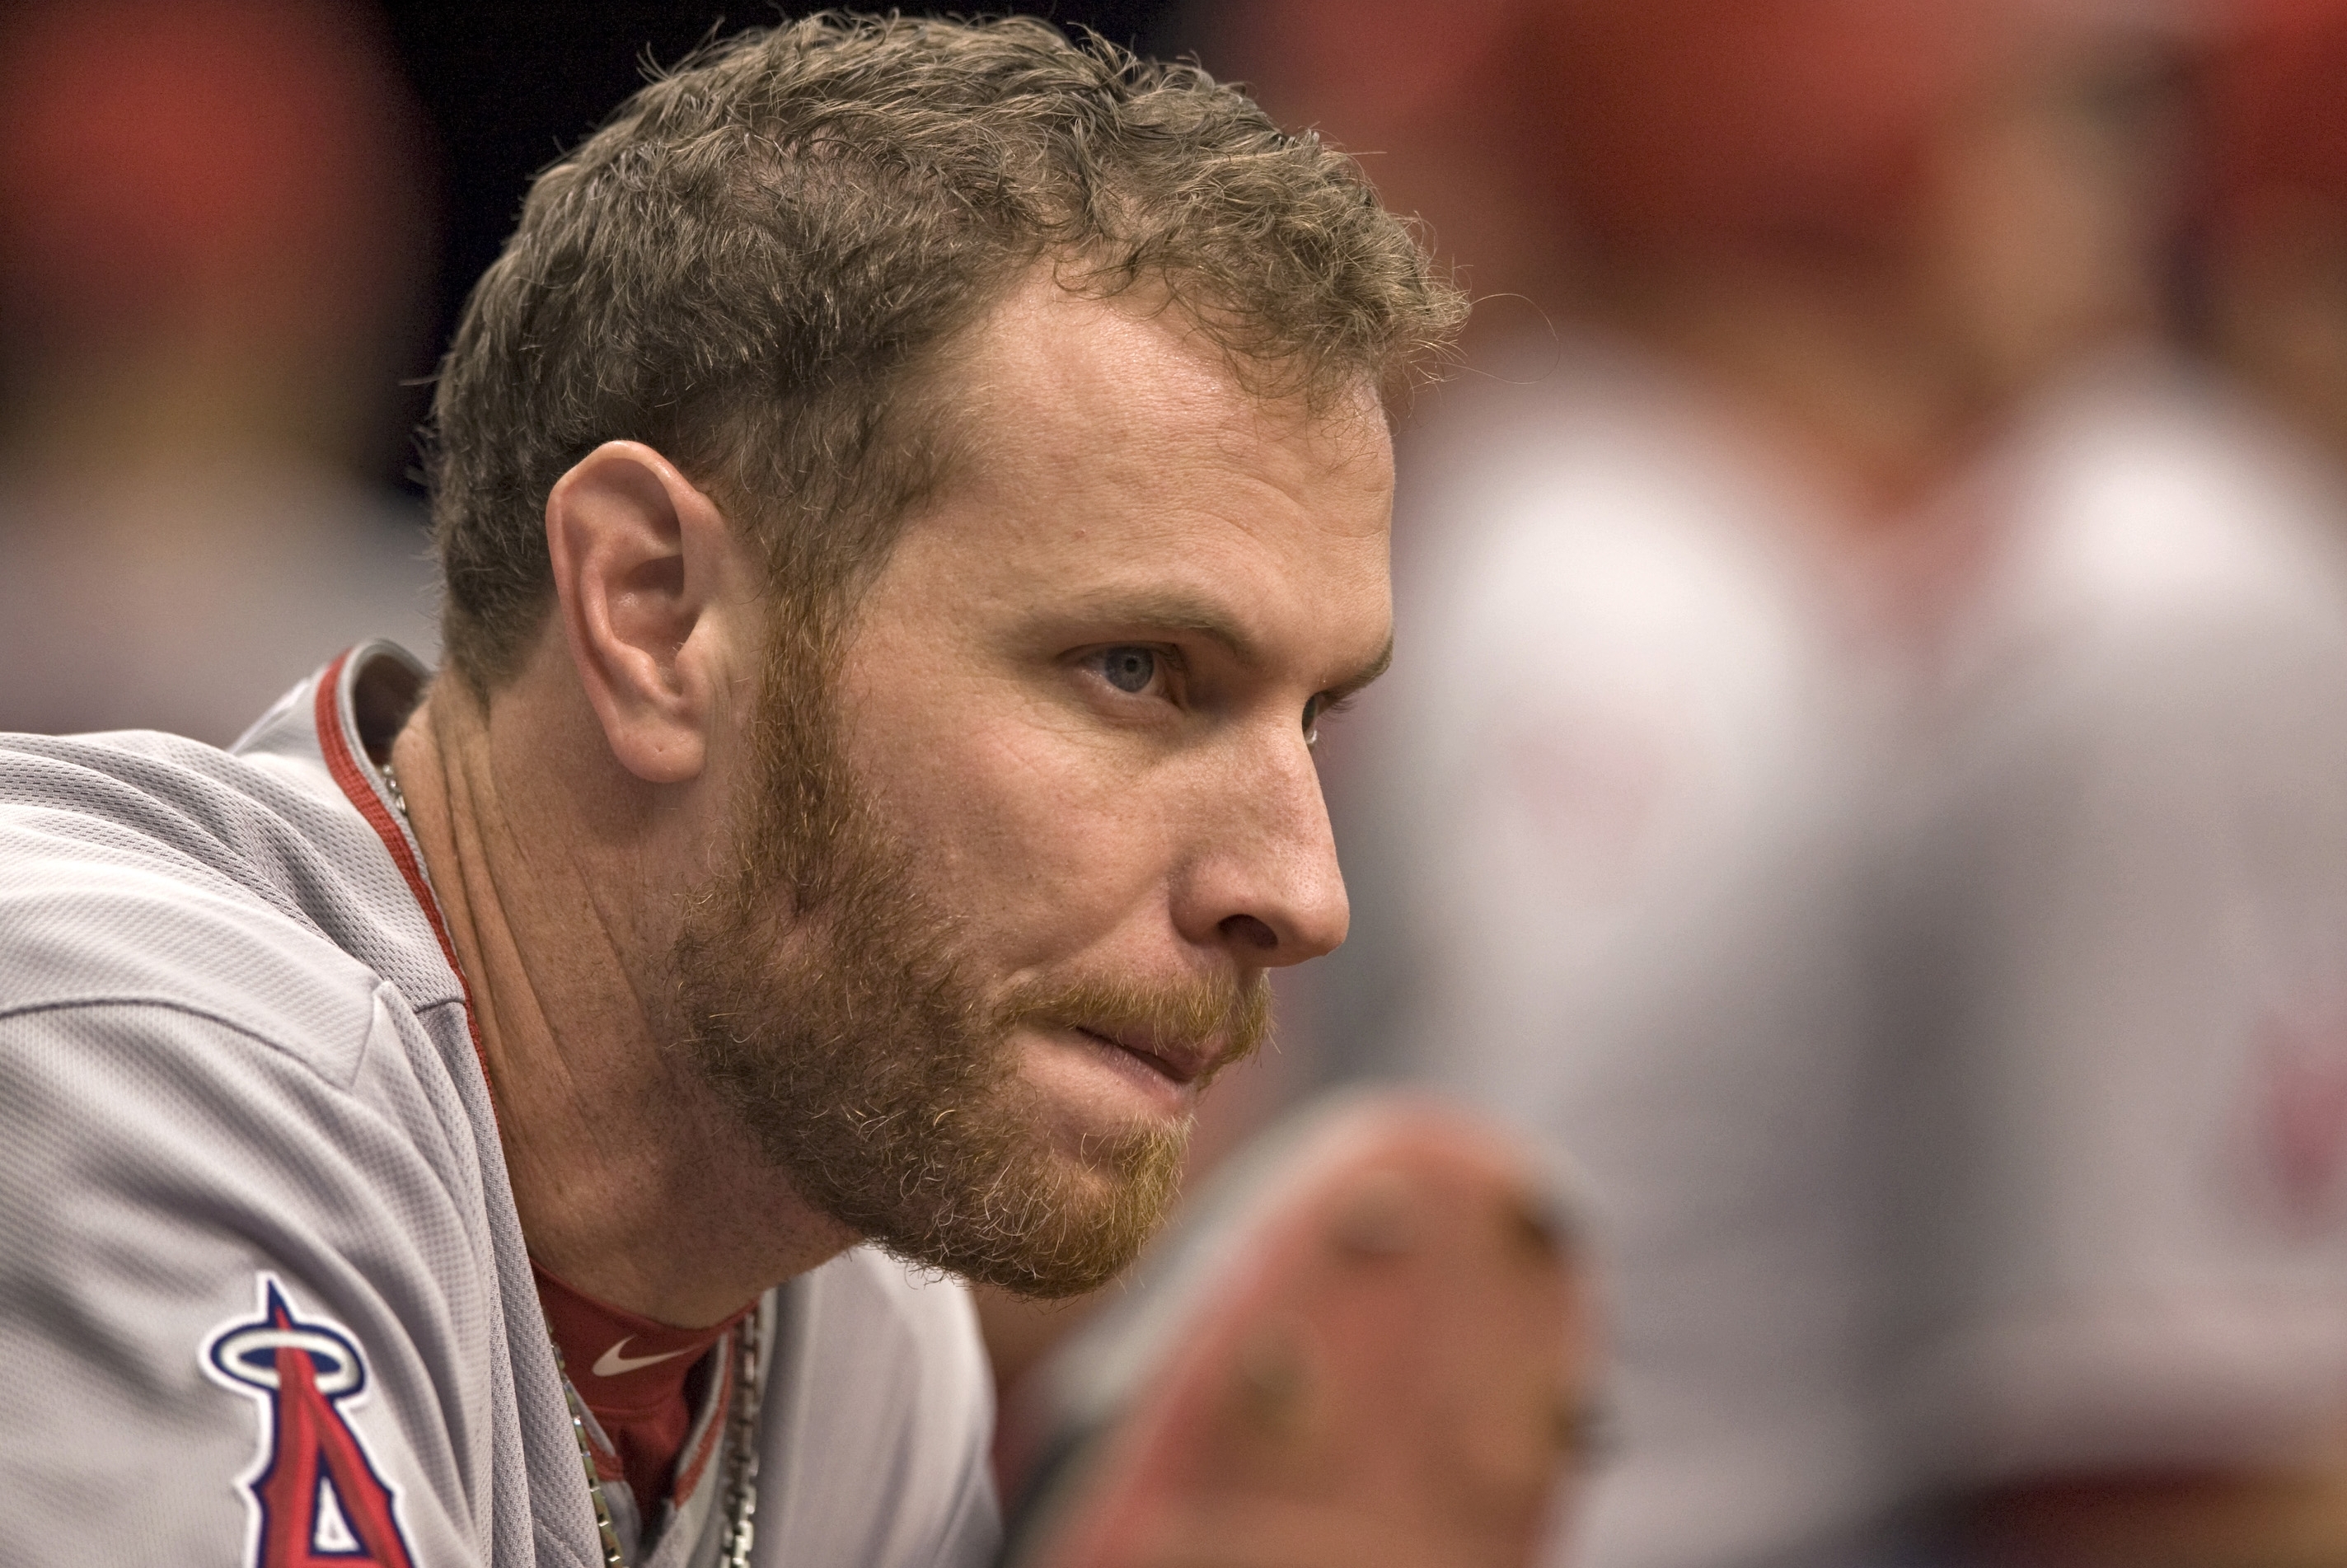 Josh Hamilton's Ex-Wife & Kids: 5 Fast Facts You Need to Know